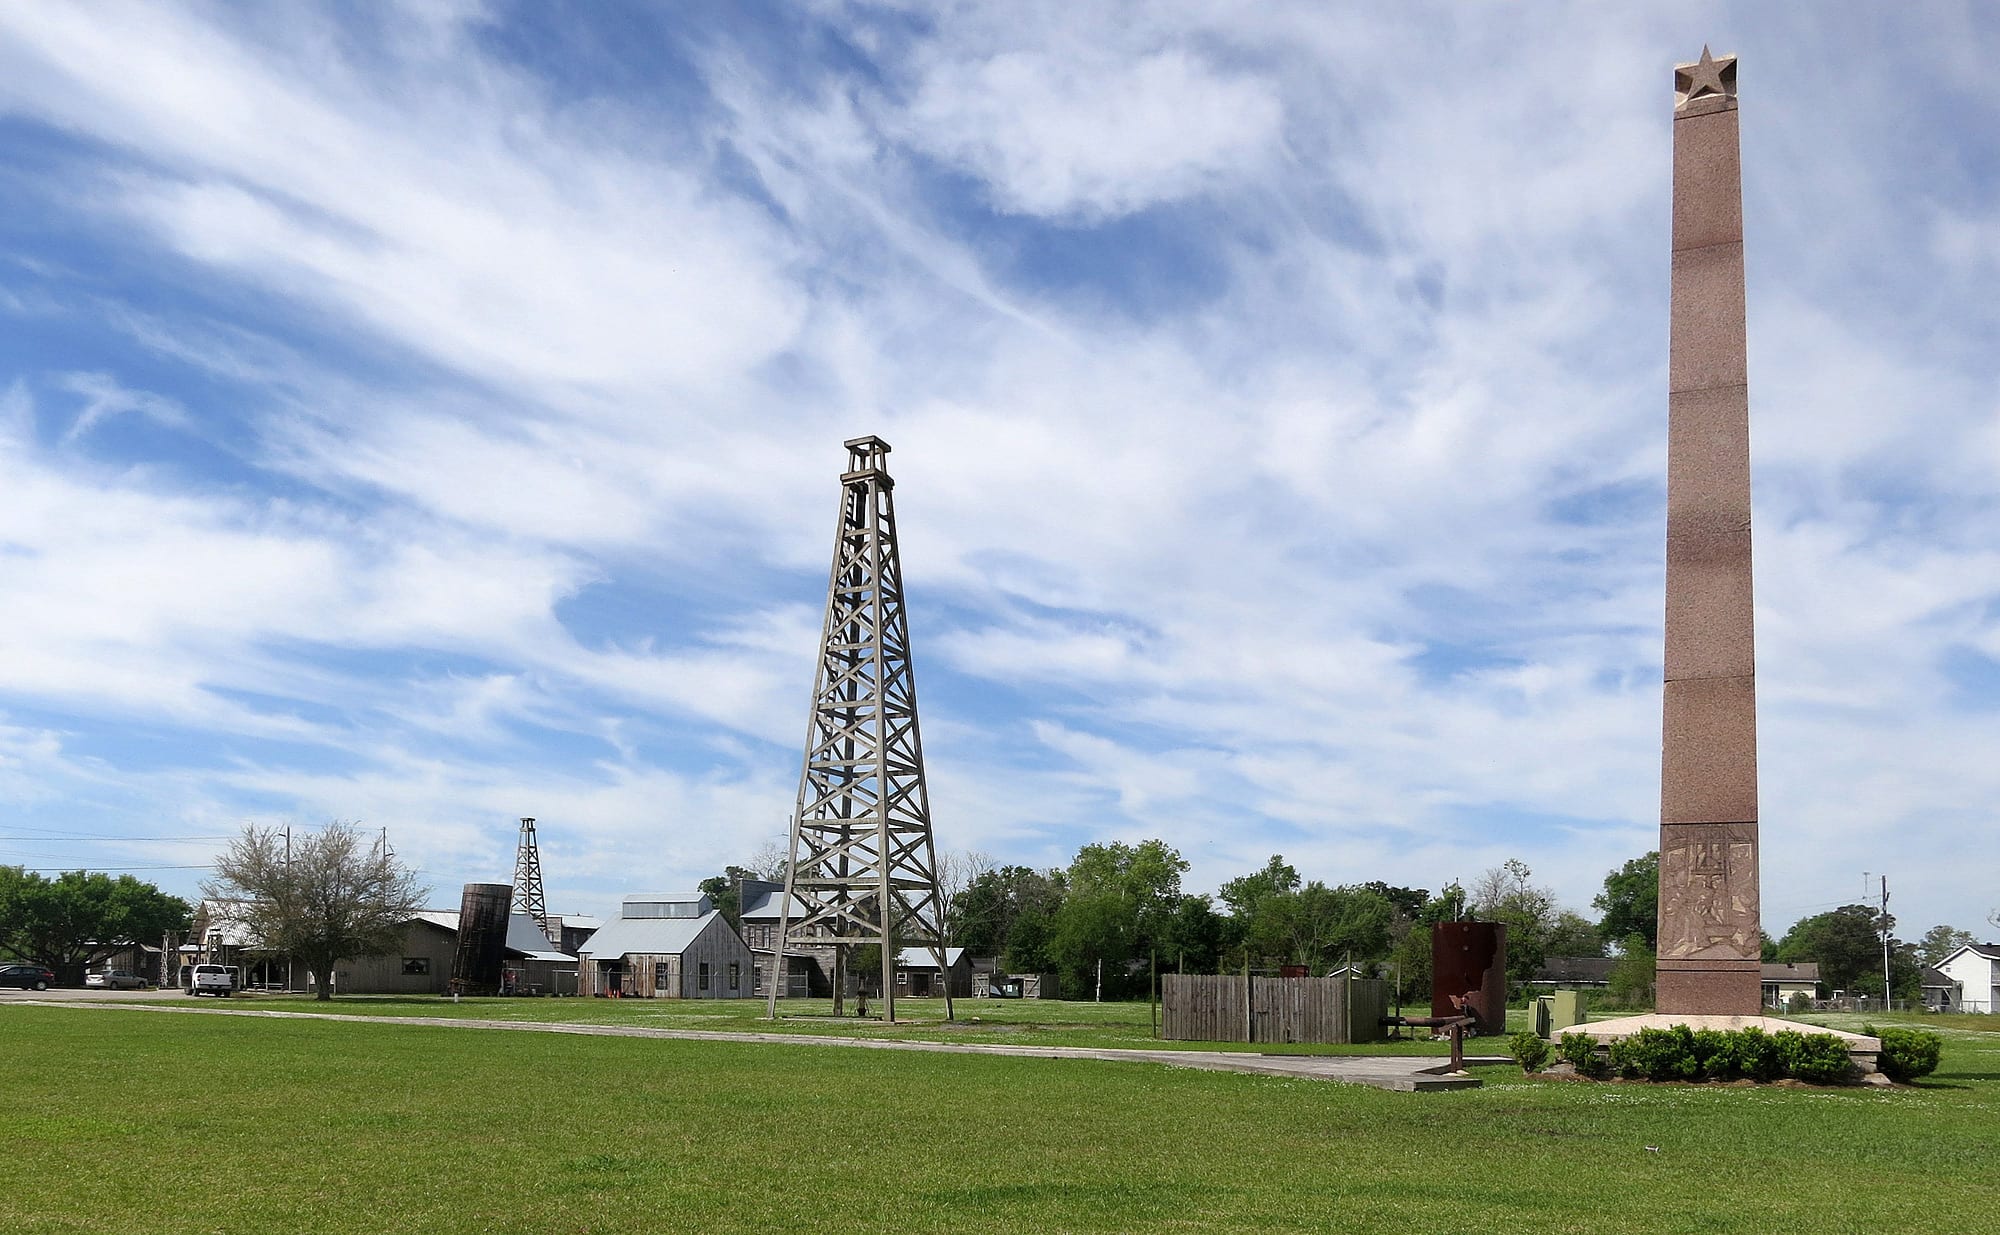 The_Spindletop-Gladys_City_Boomtown_Museum